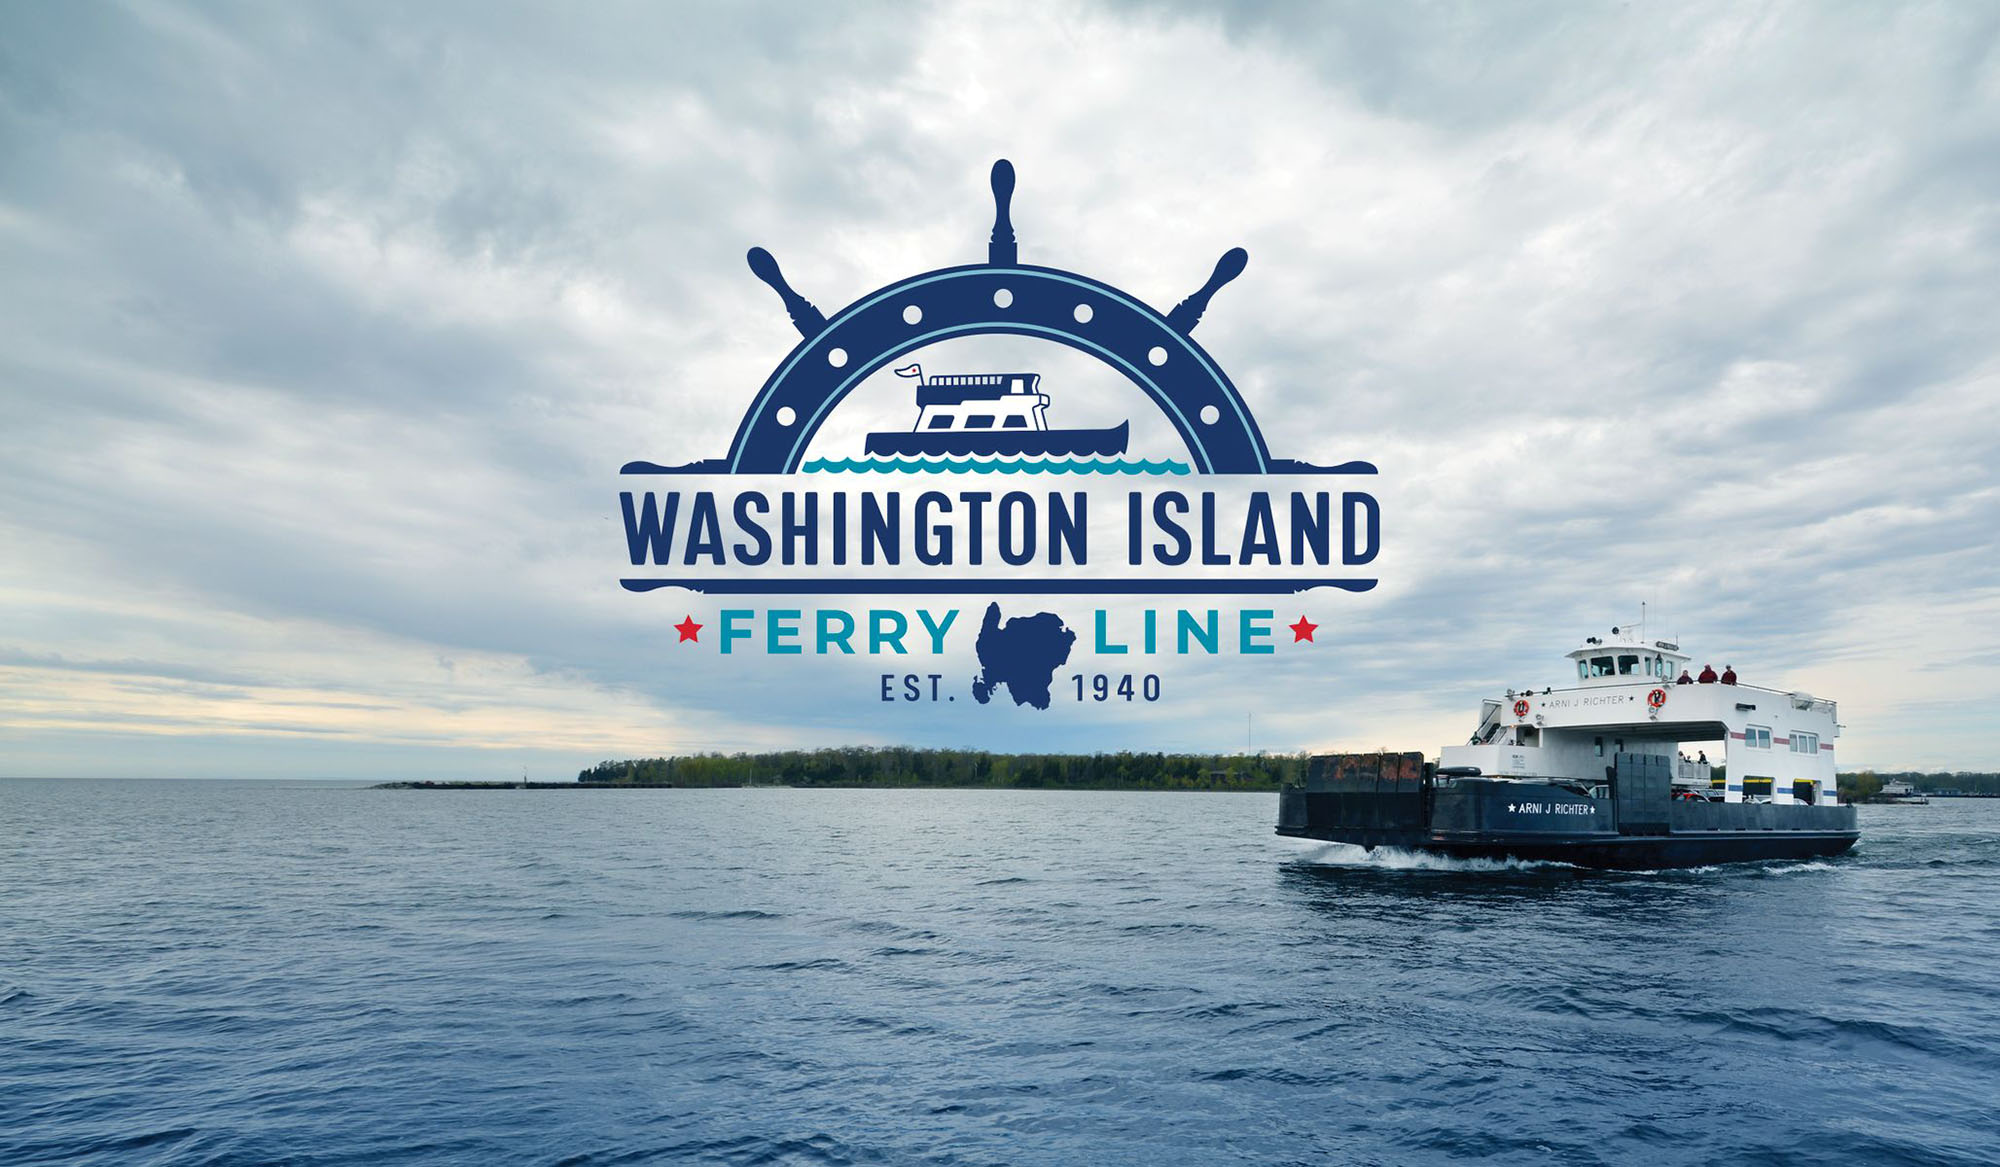 A collection of brochure, social media graphics and website design created for the Washington Island Ferry rebranding